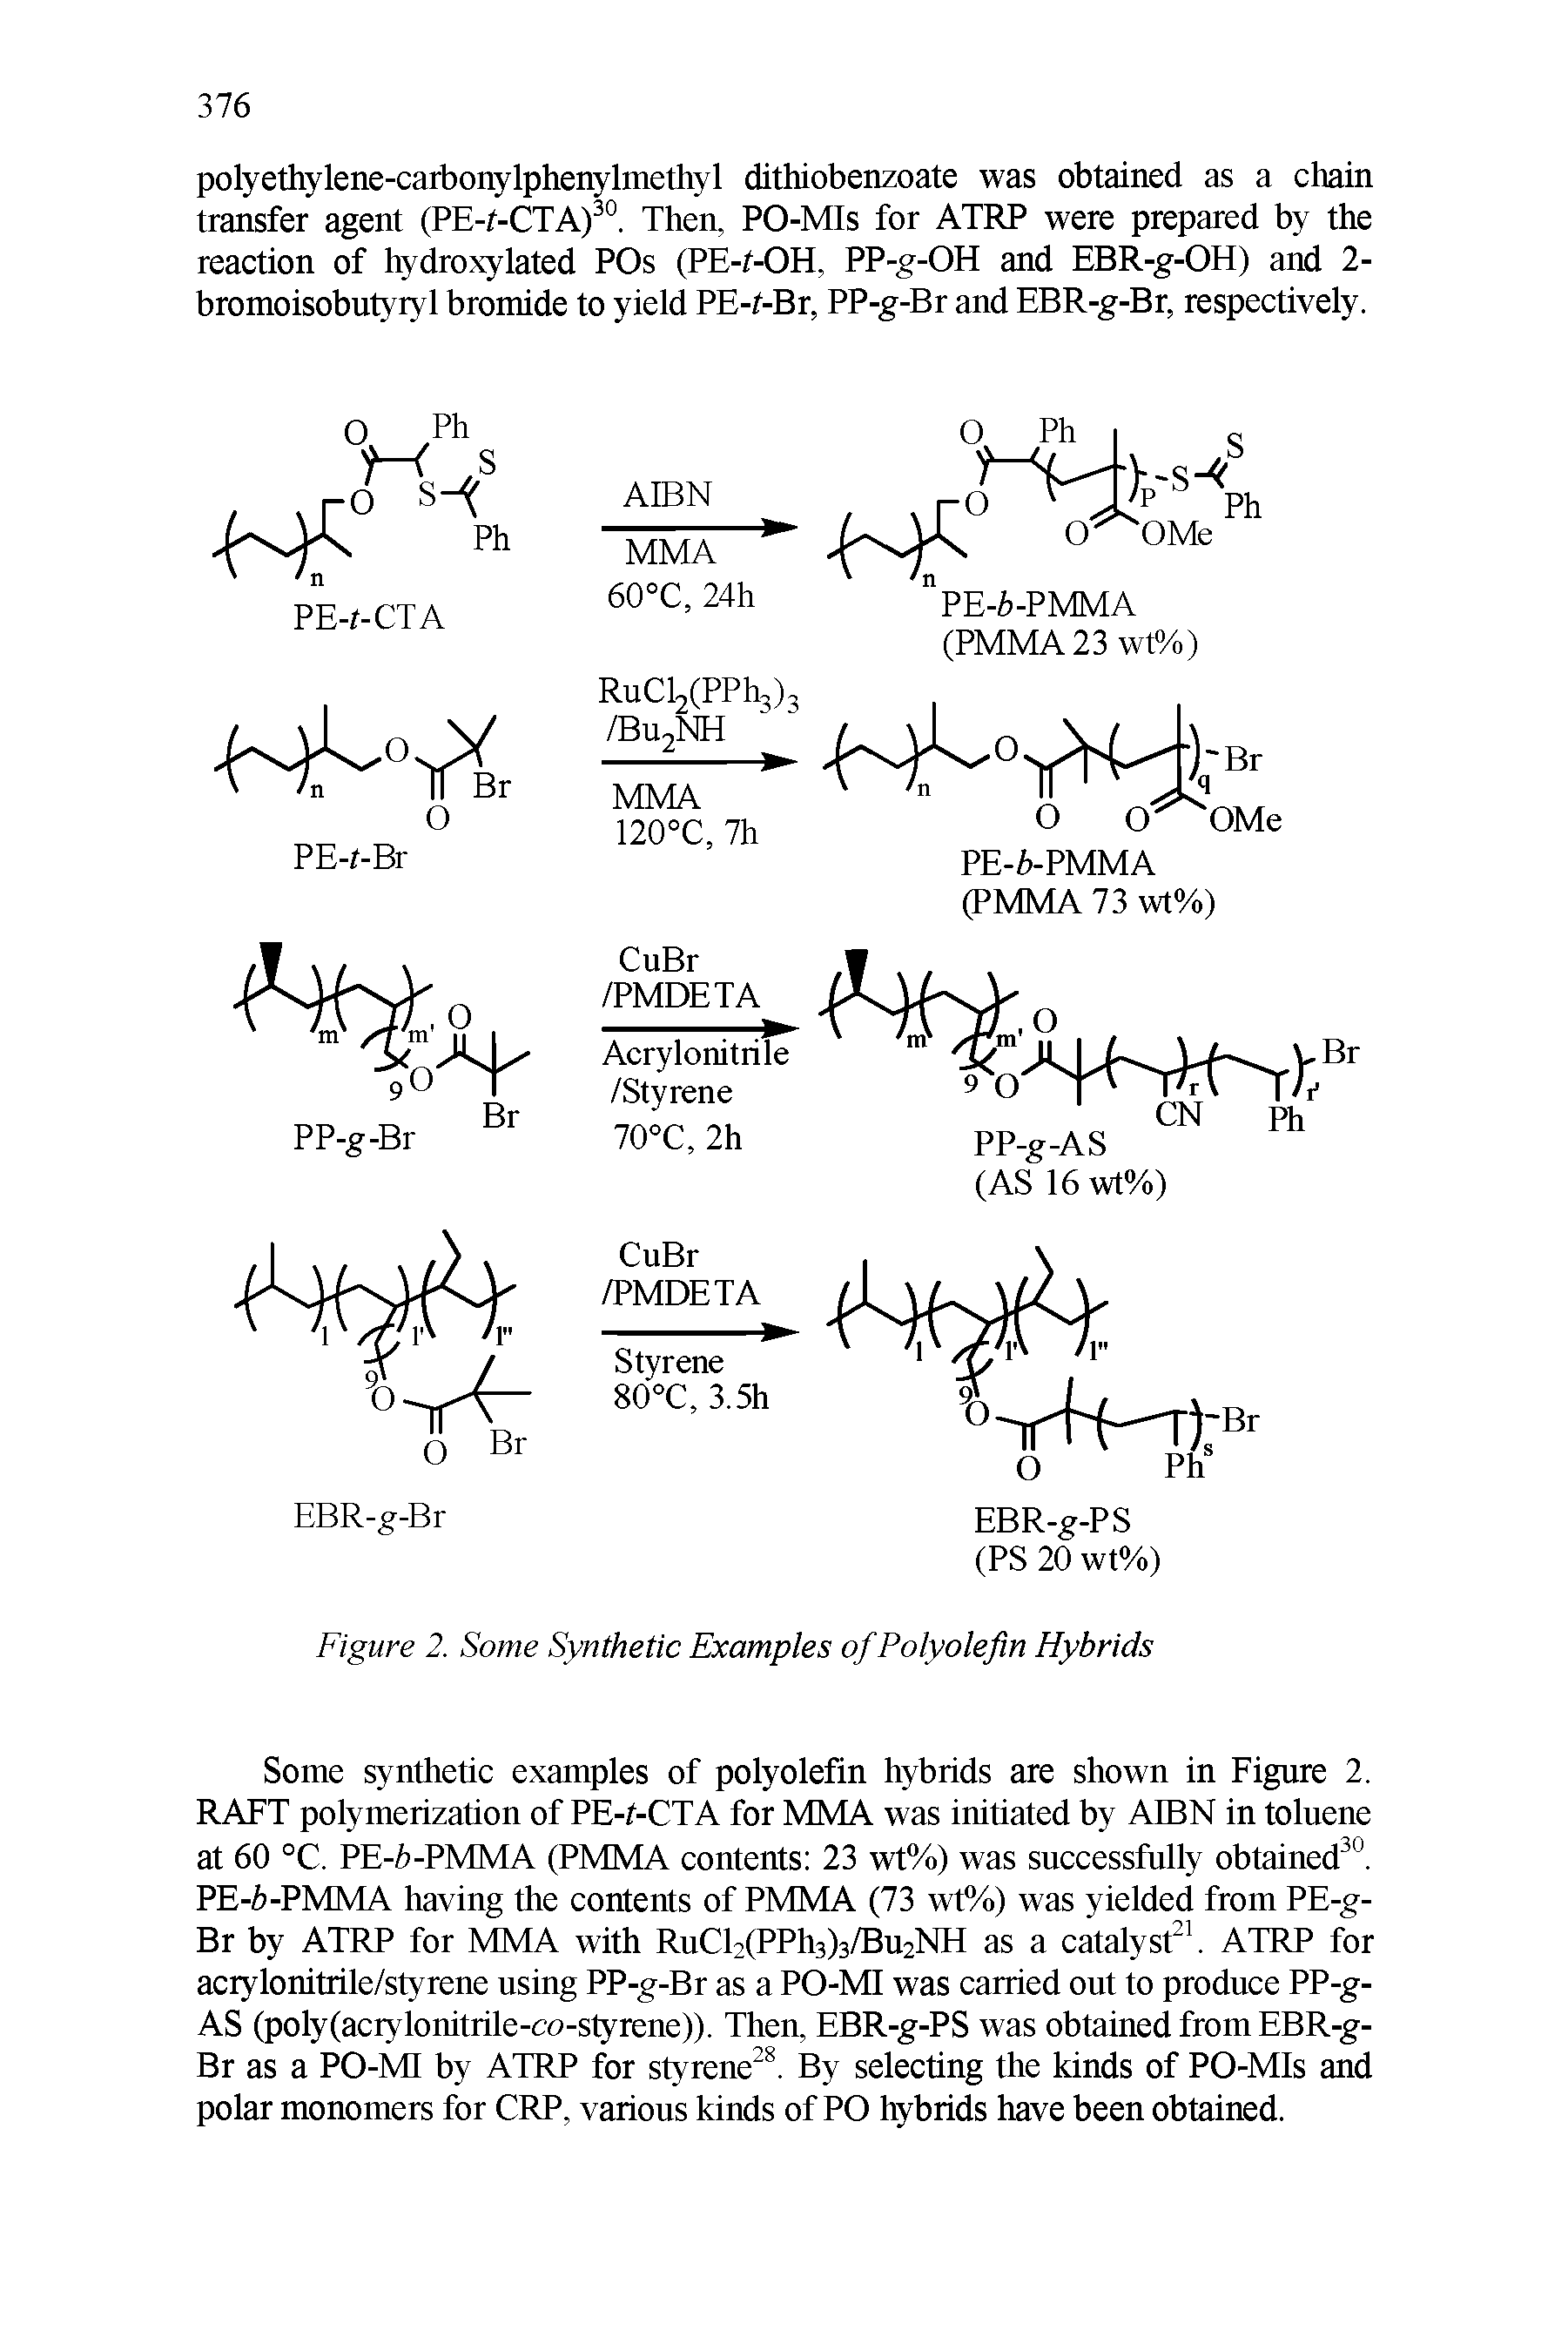 Figure 2. Some Synthetic Examples of Polyolefin Hybrids...